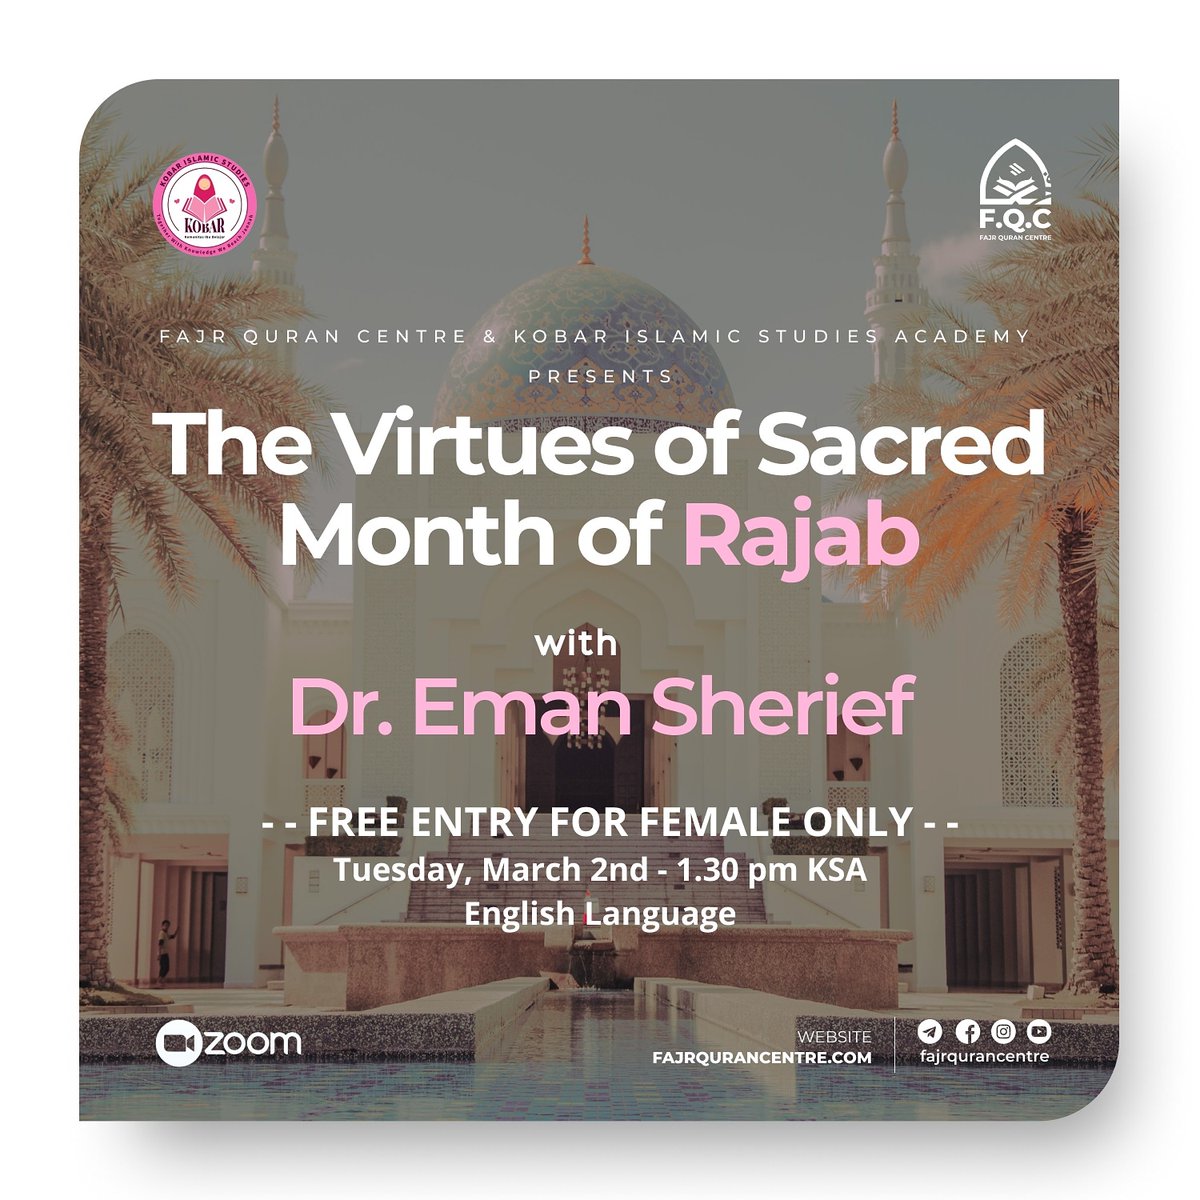 T O D AY

Do you know what's the virtues of sacred month of Rajab?
Let's join this lecture!
Collaboration between Fajr Quran Centre & Kobar Islamic Studies Academy

#fajrqurancentre
#kobarislamicstudies
#islamiclecture  #onlineislamiclectures
#rajab